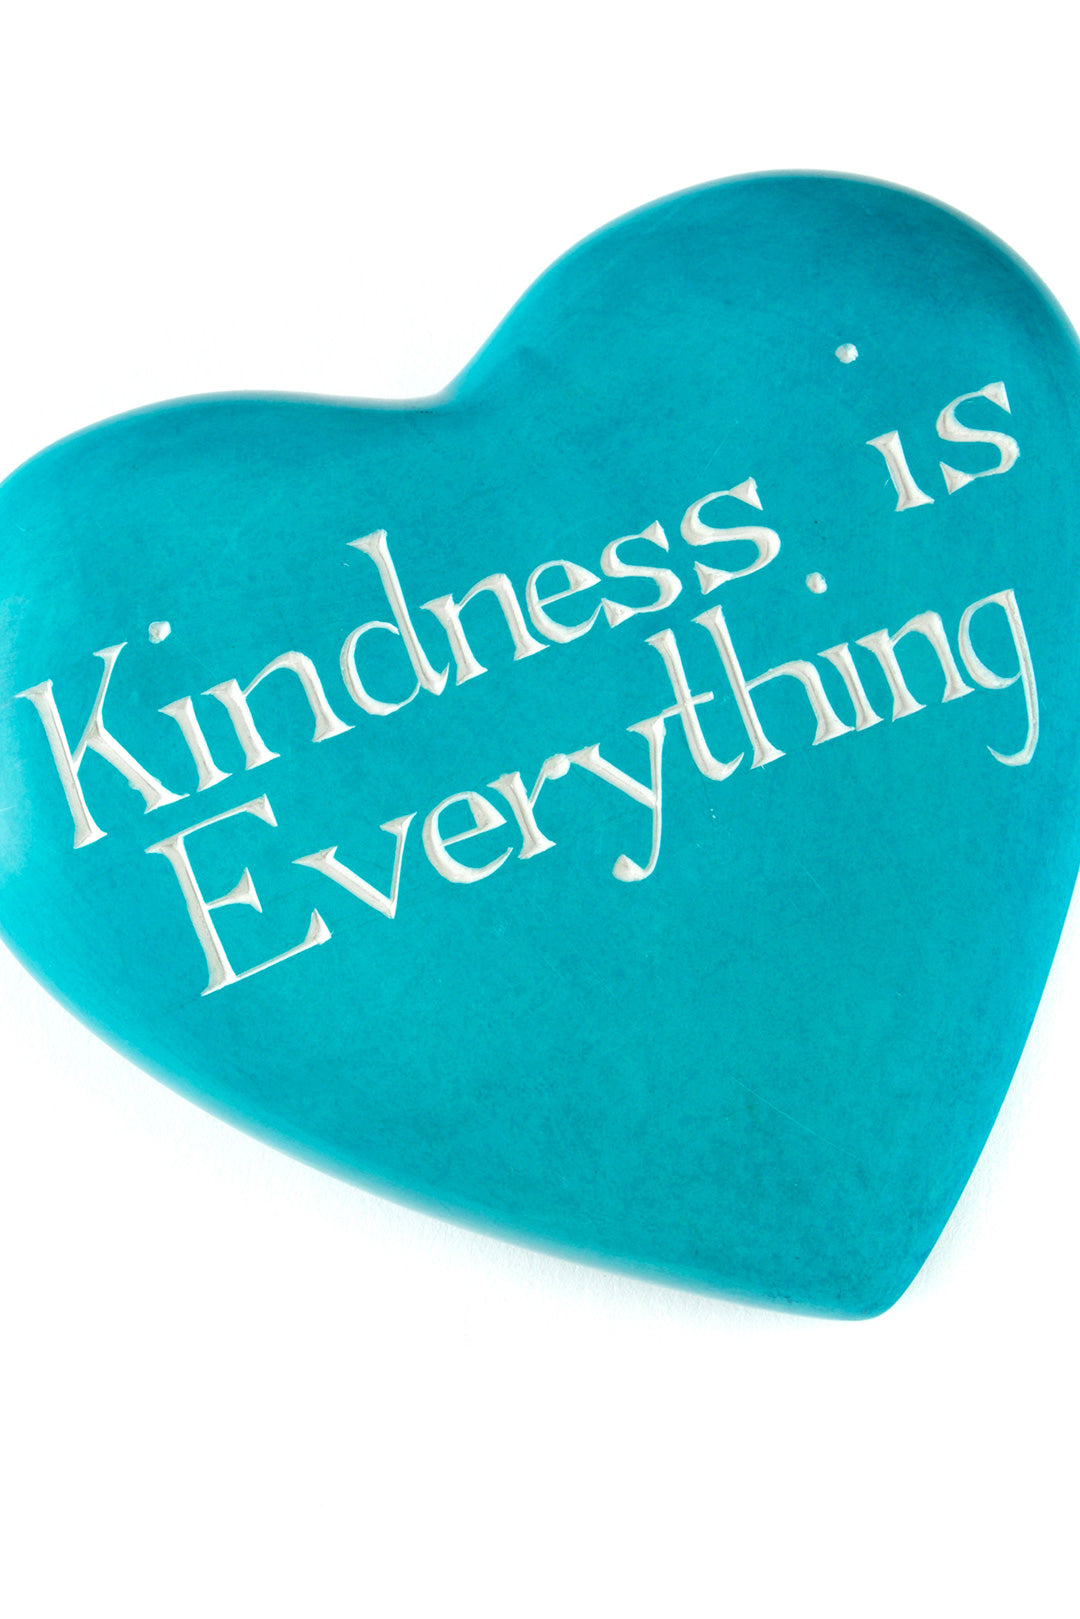 Kindness is Everything Soapstone Paperweight Heart